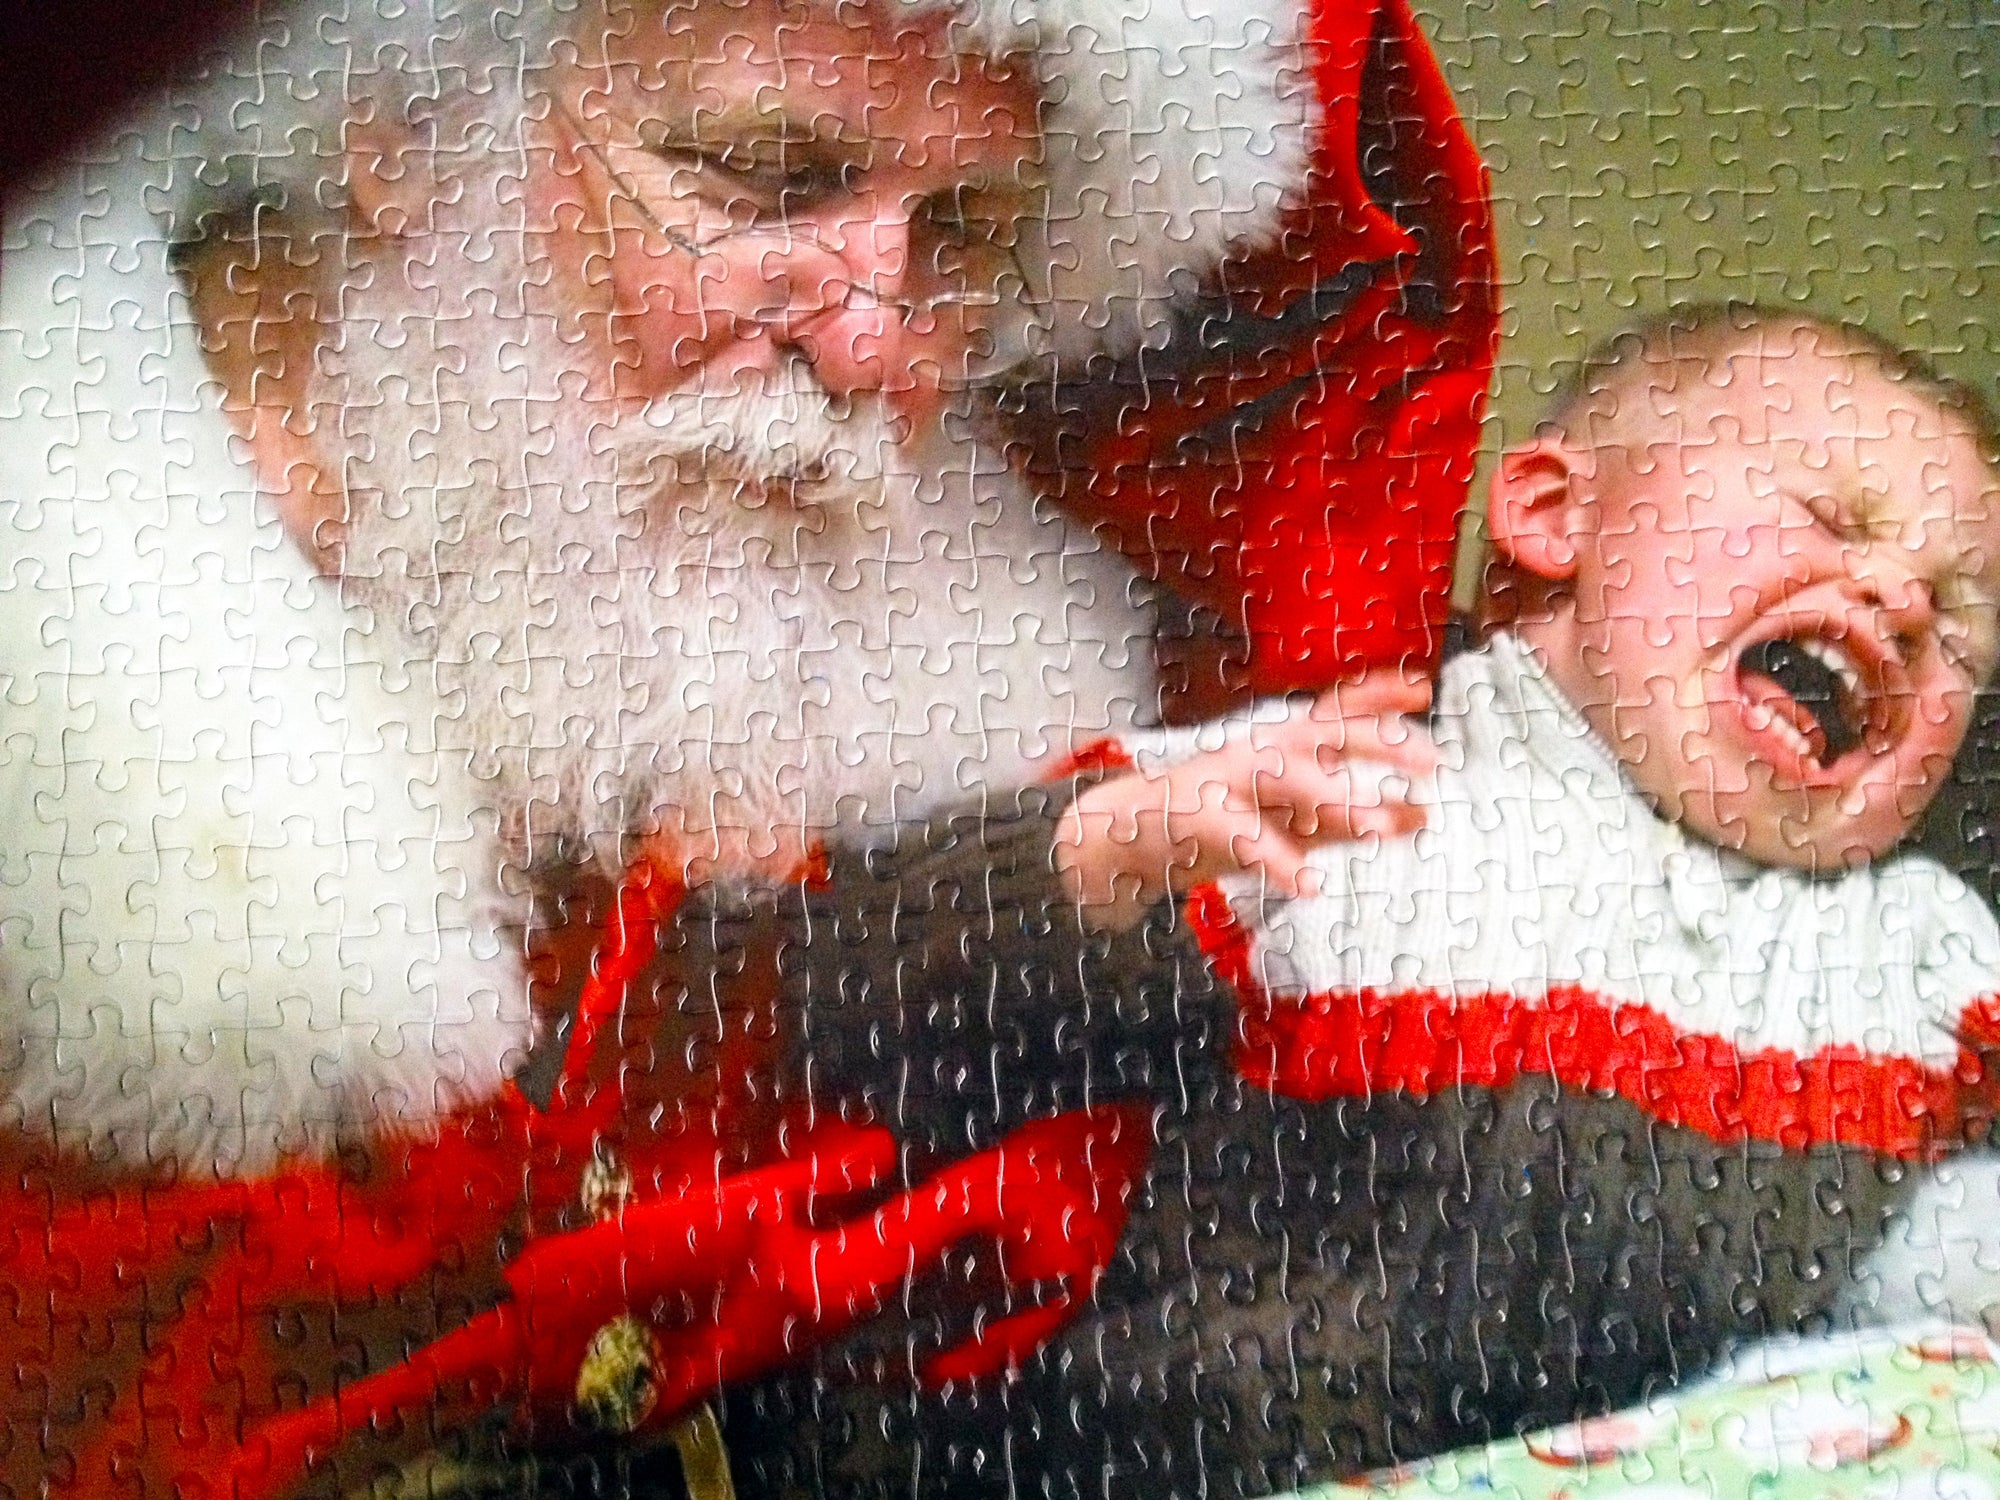 custom puzzle of santa holding crying child.  Photo puzzle has been cut into 500 piece photo puzzle.